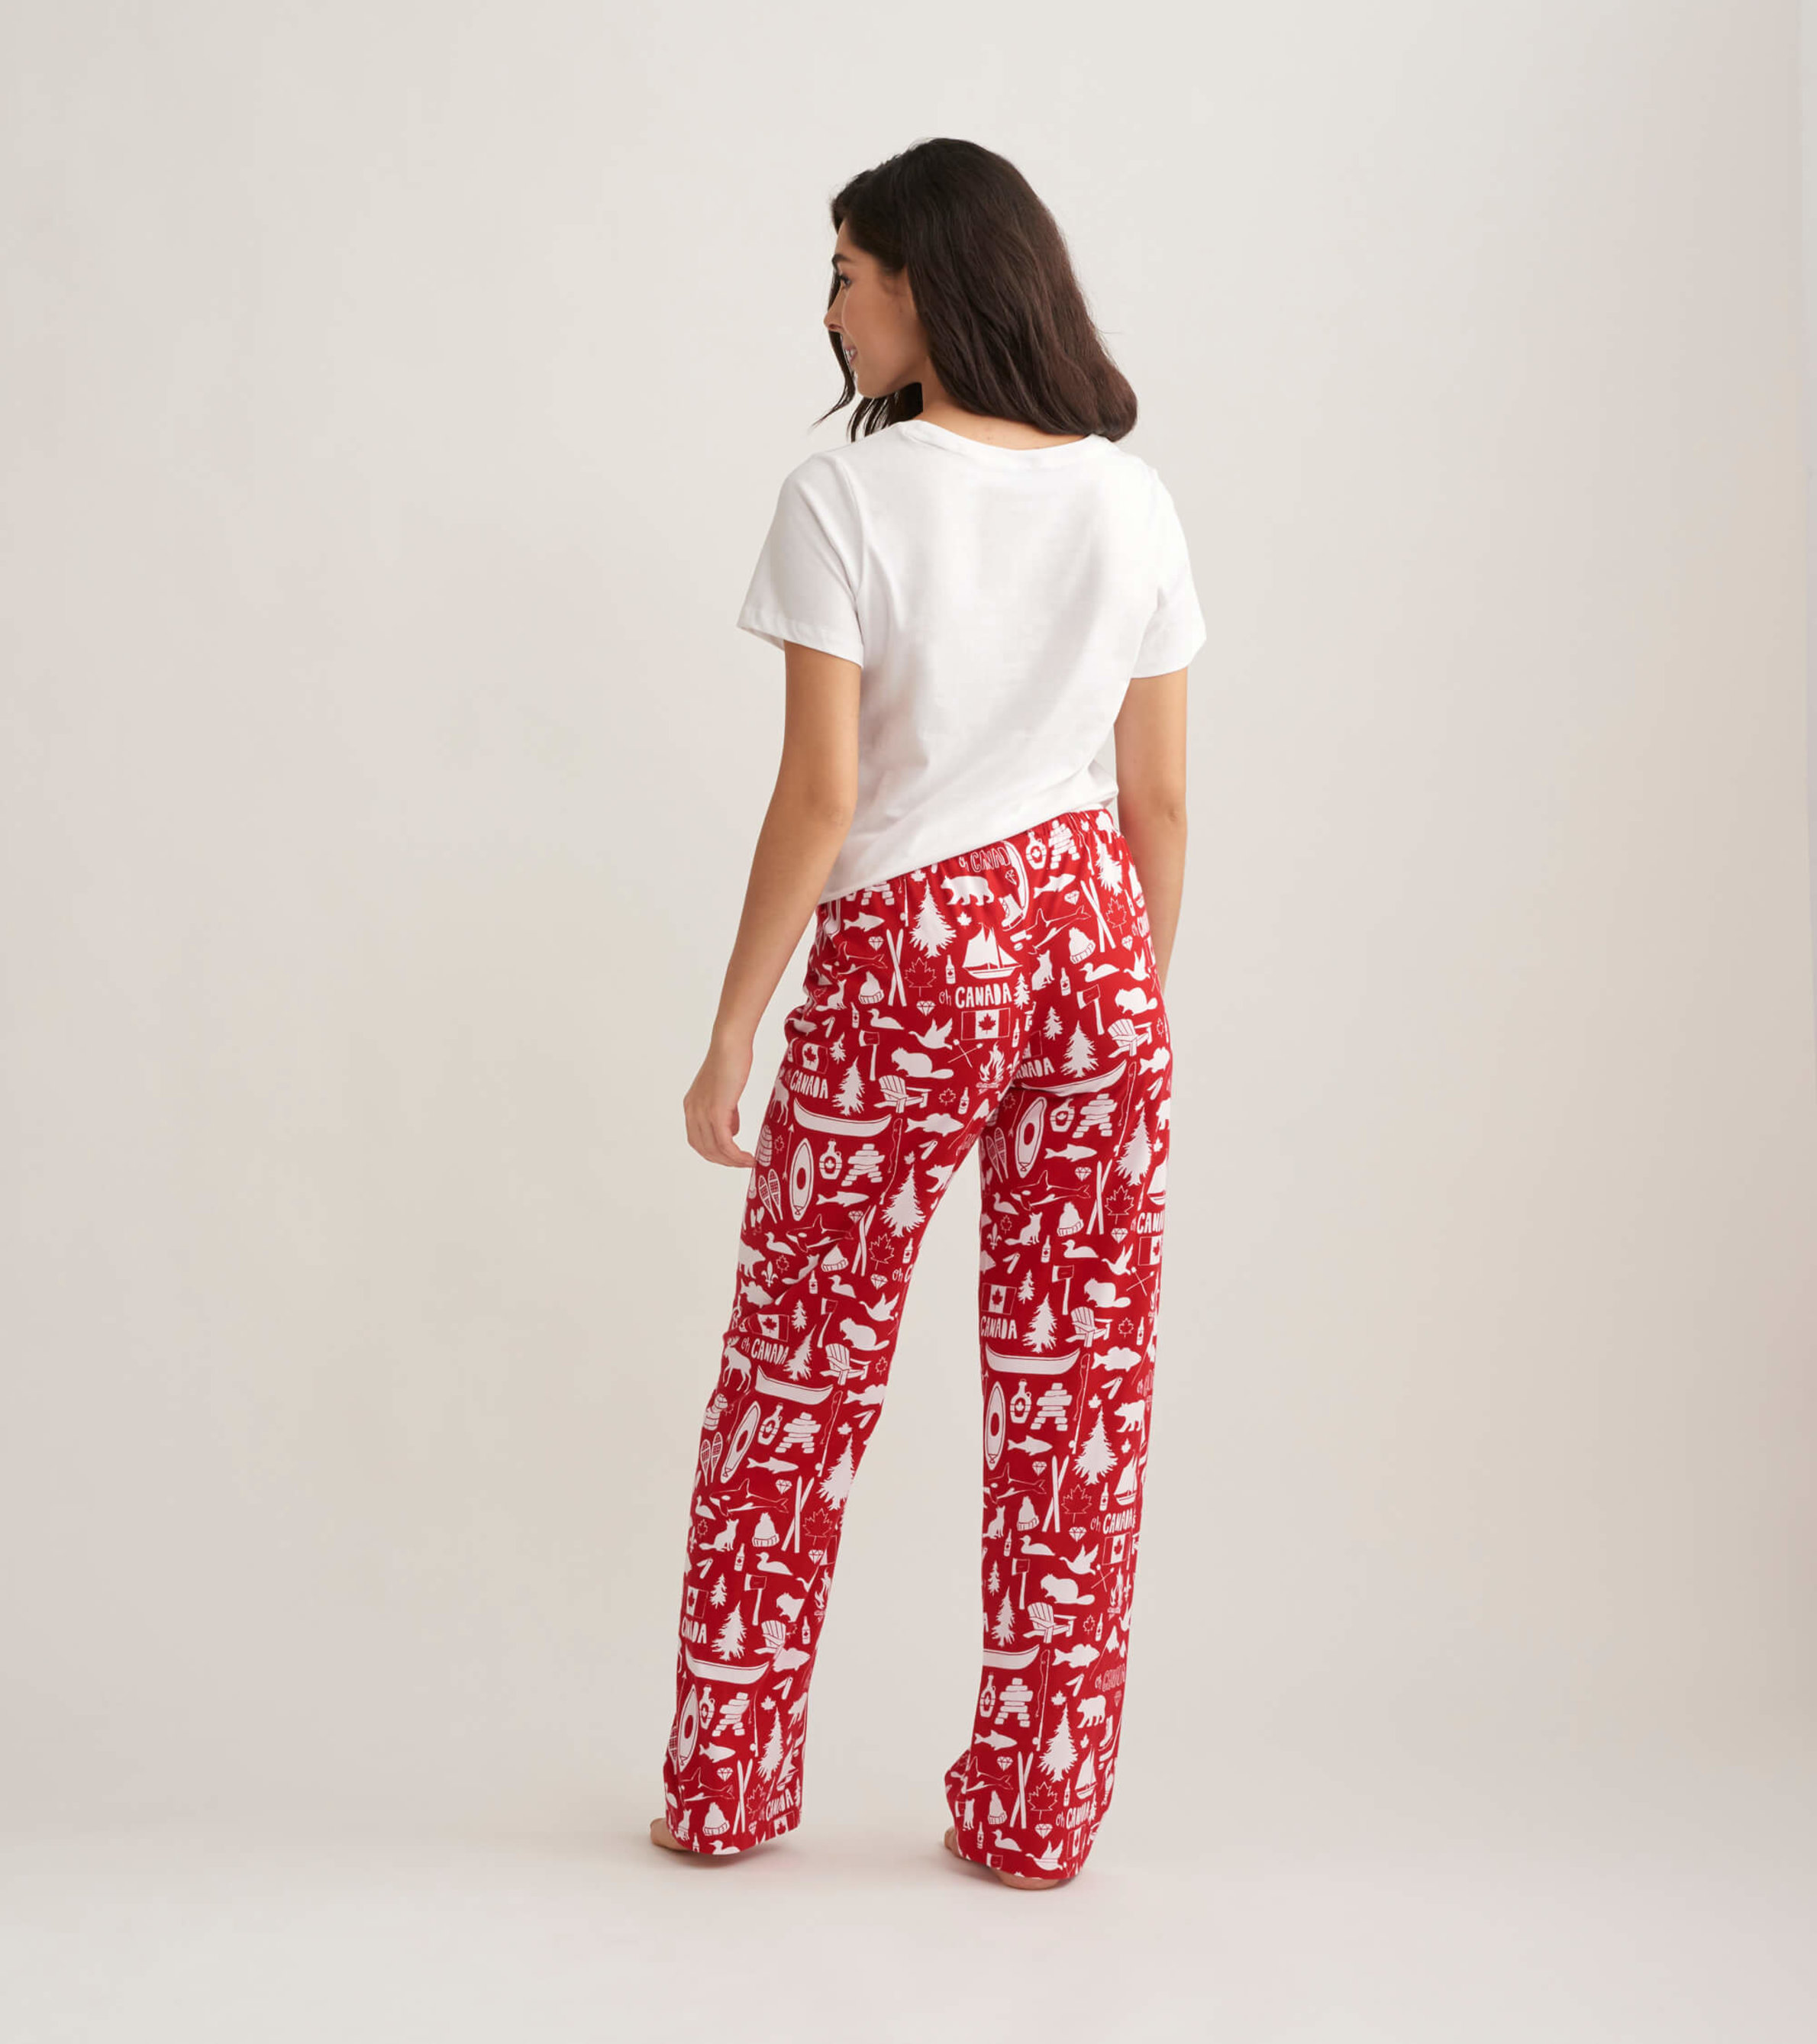 Oh Canada Women's Tee and Pants Pajama Separates - Little Blue House CA